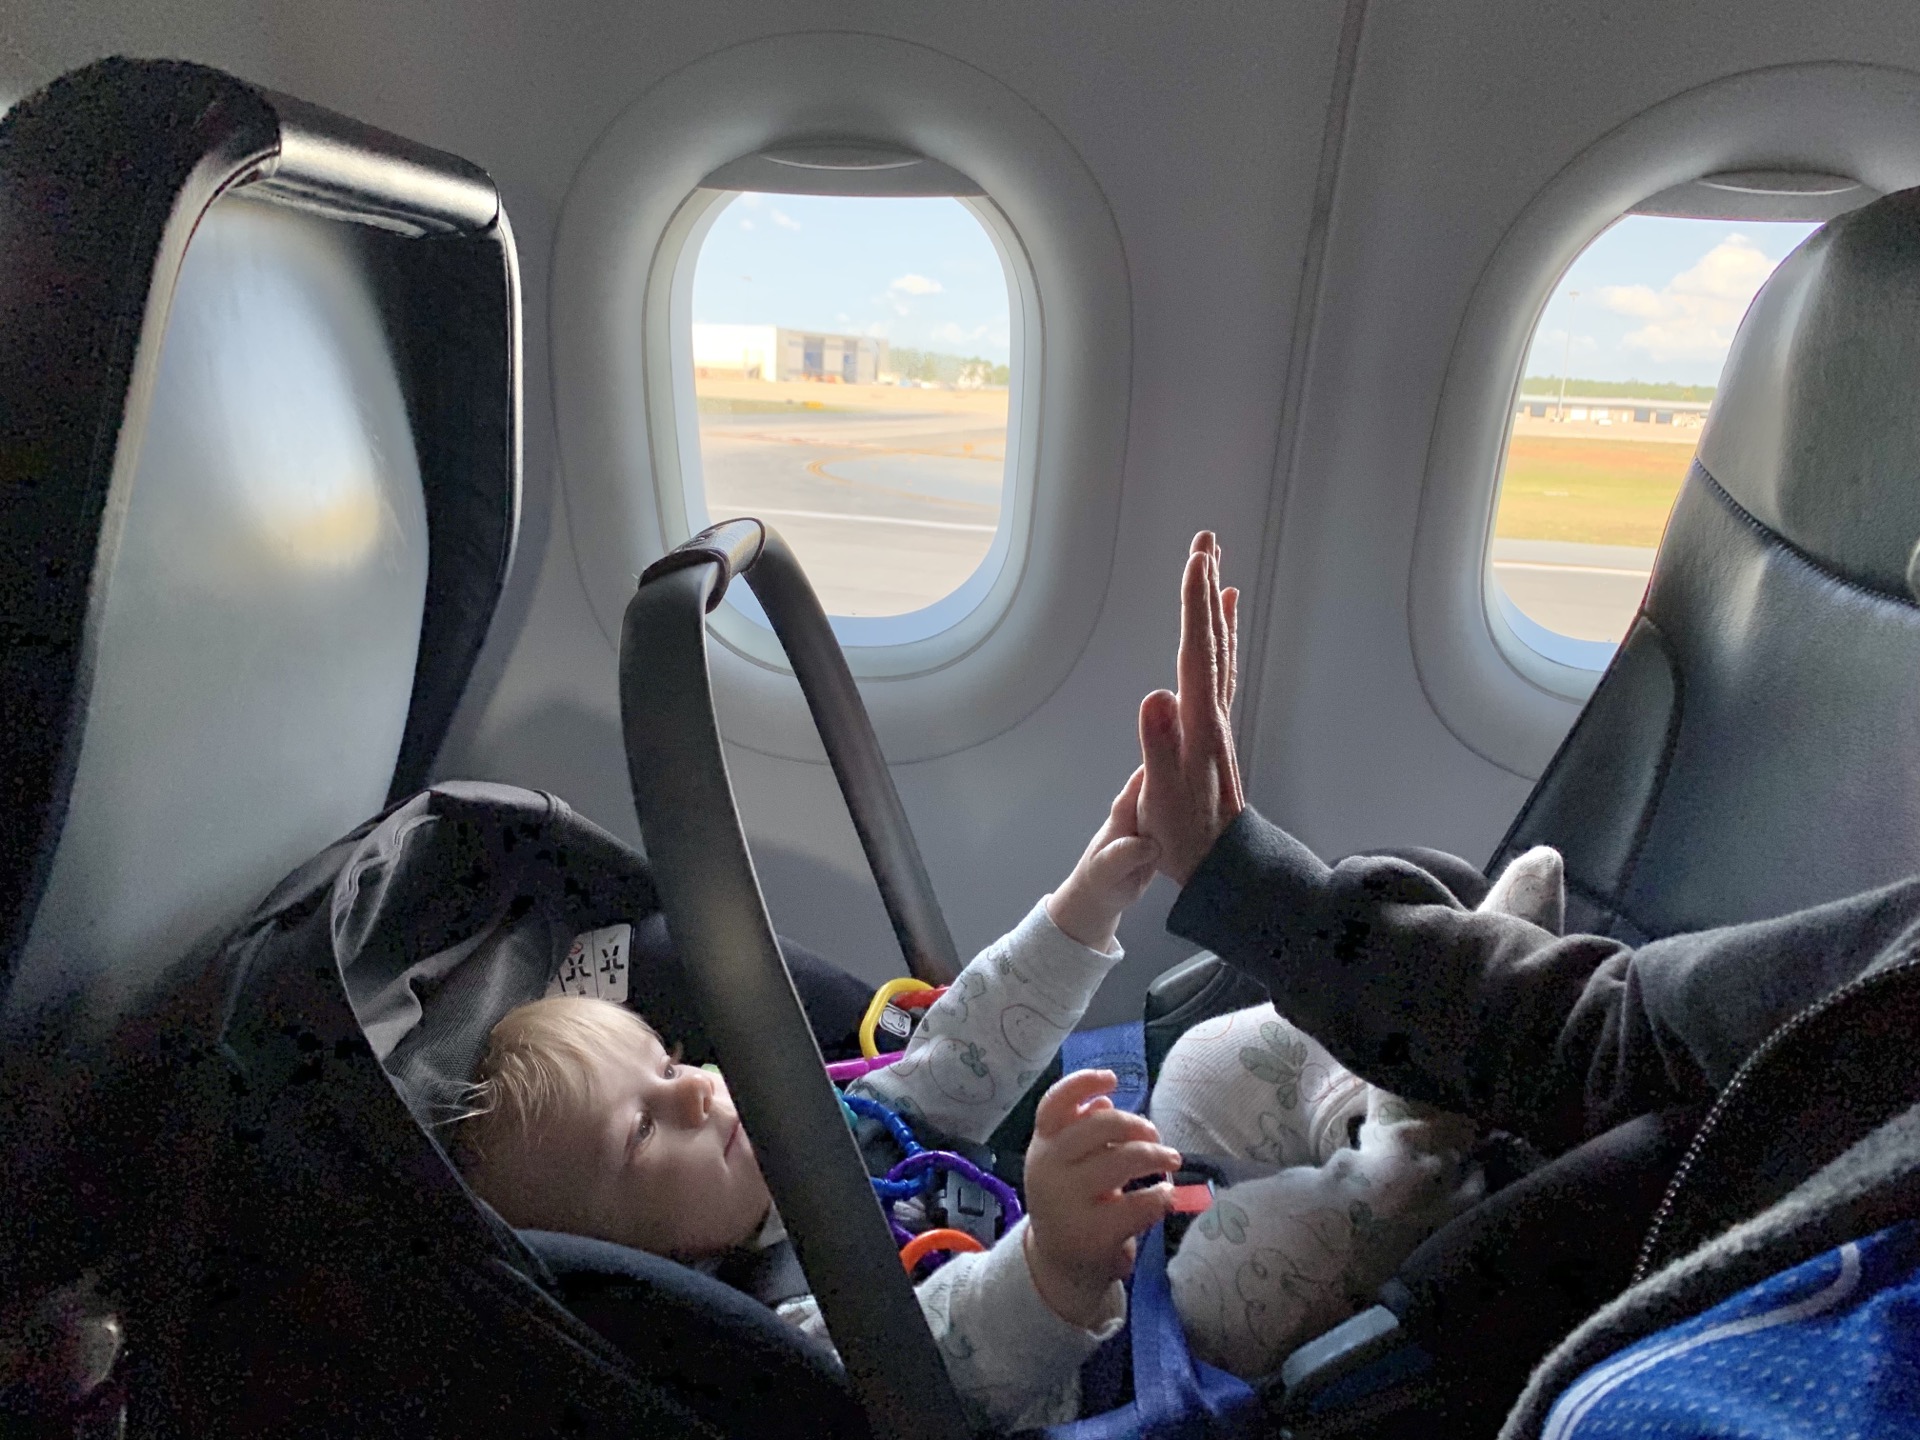 20 Tips For Flying With An Infant On Lap - Our Family Passport